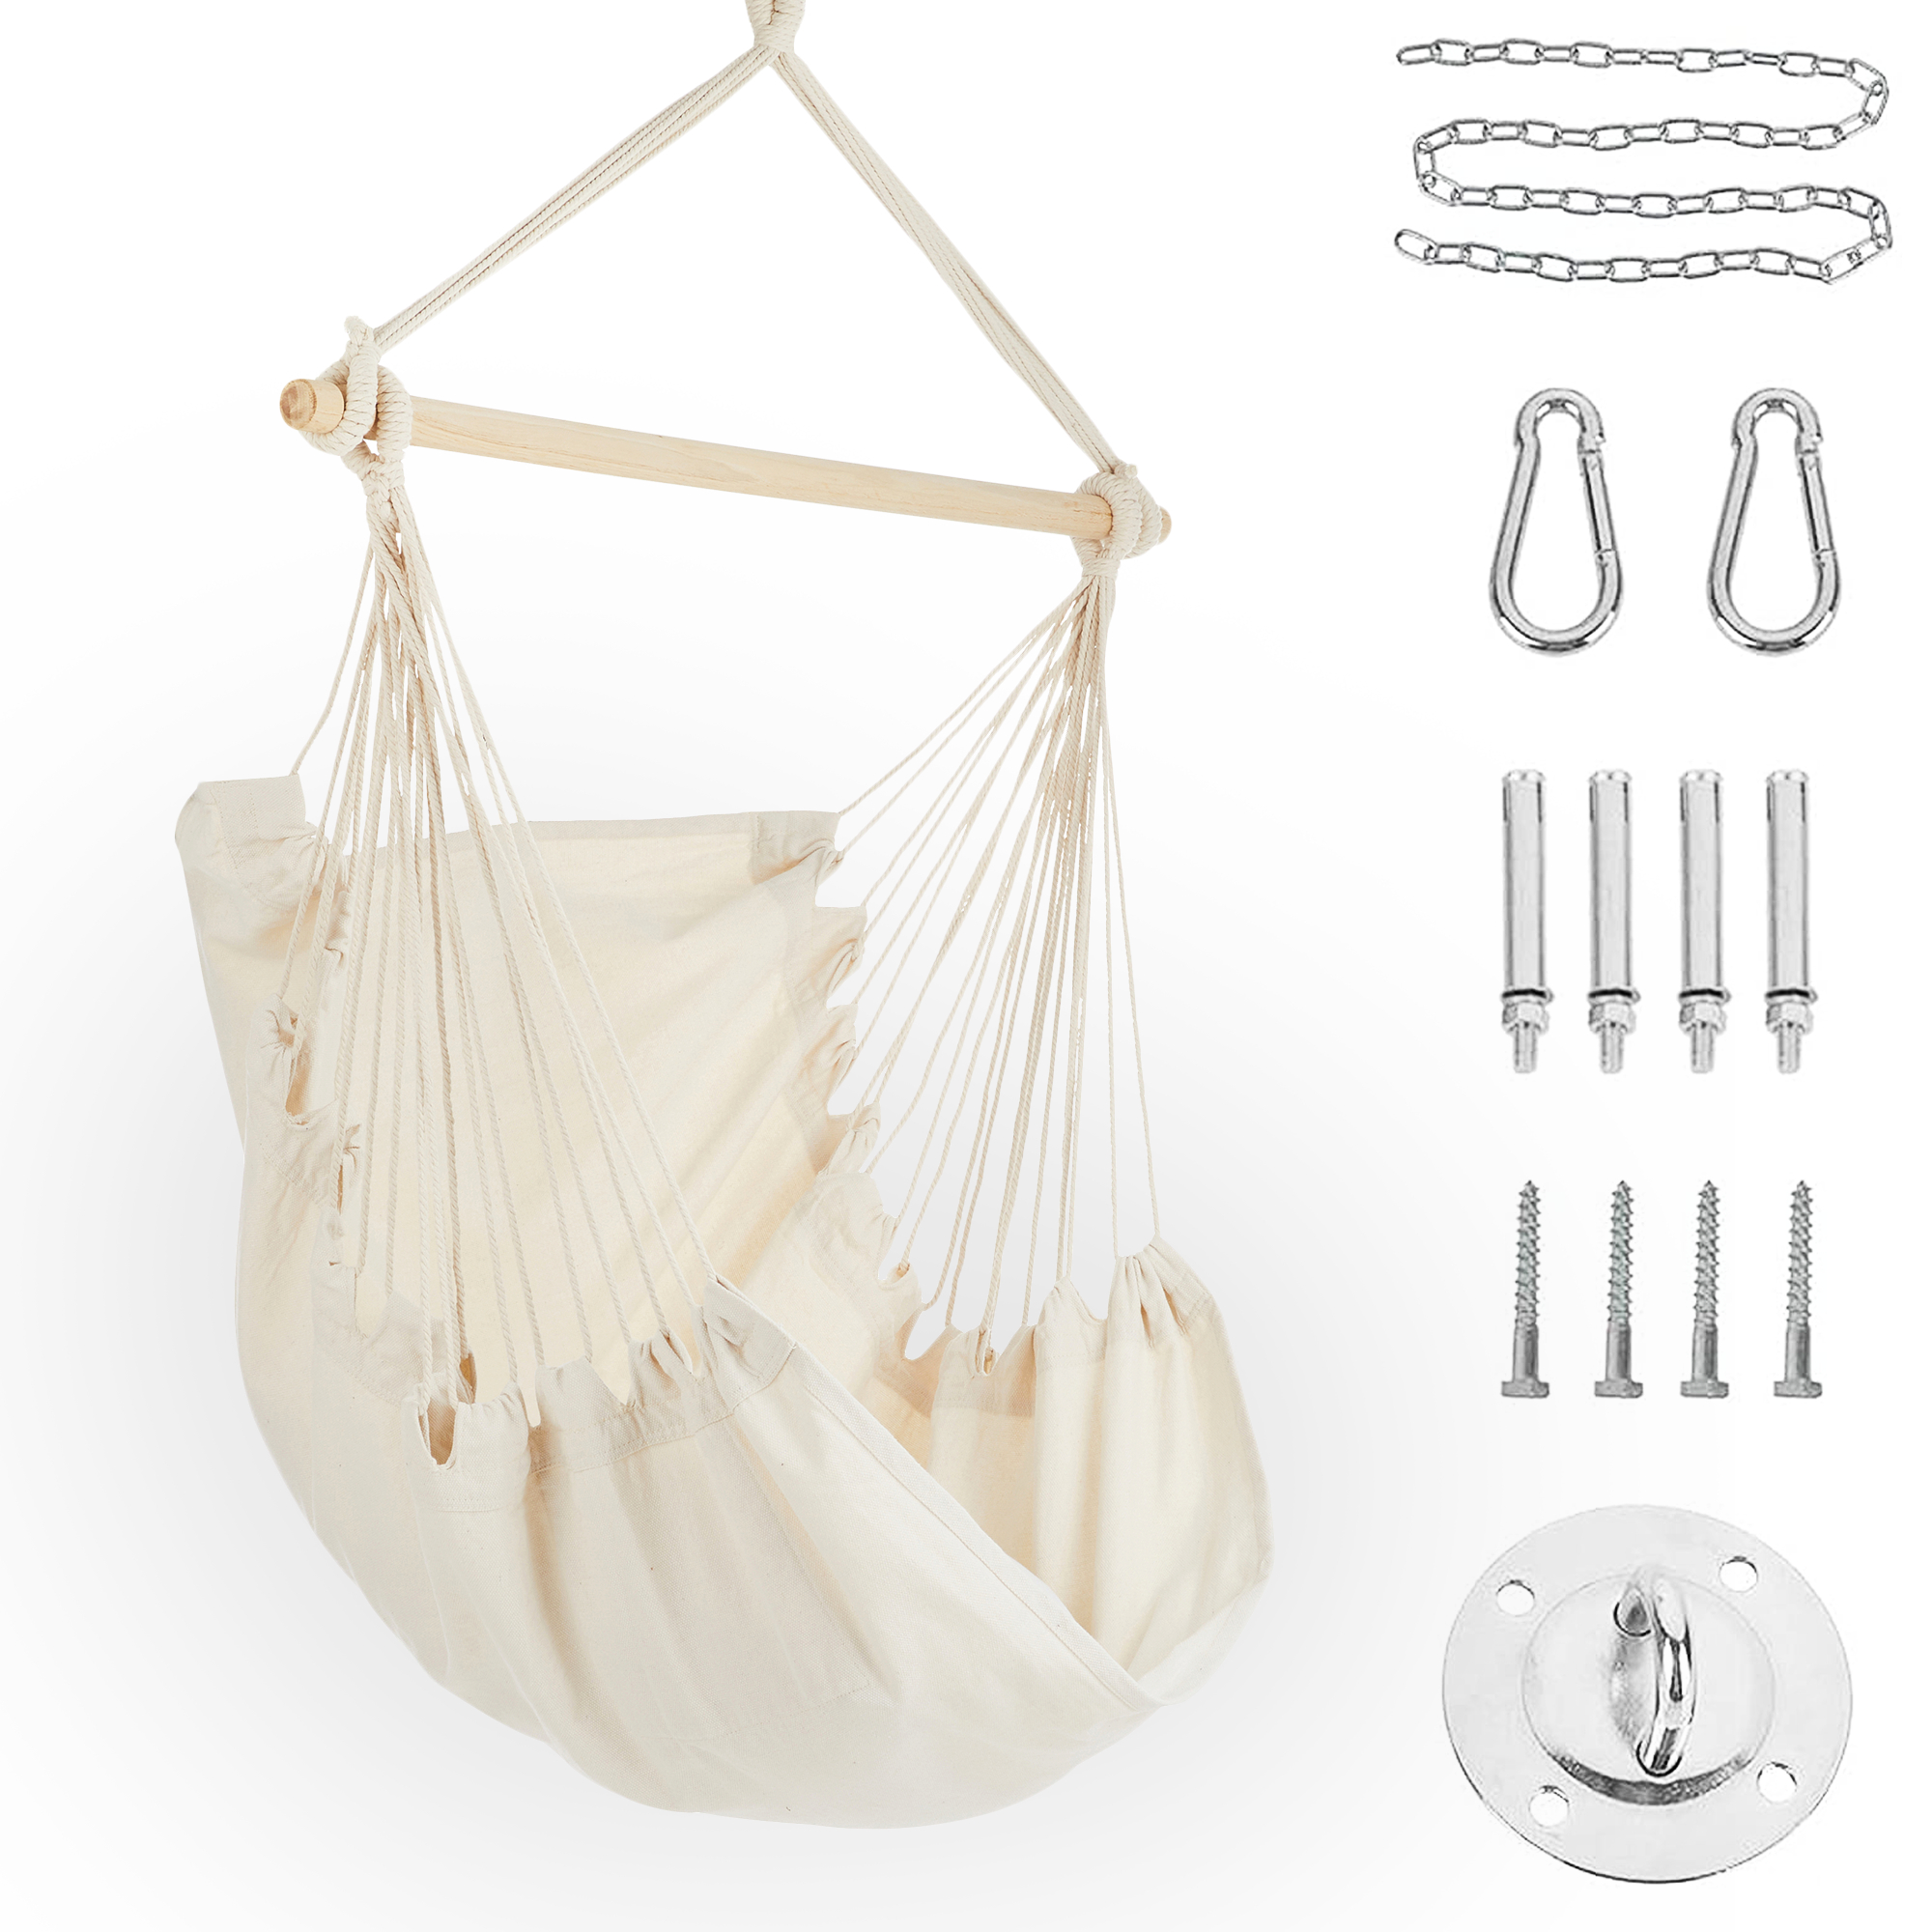 Project One Hanging Rope Hammock Chair, Hanging Rope Swing Seat with Carrying Bag, and Hardware Kit Perfect for Outdoor/Indoor Yard Deck Pat - Beige